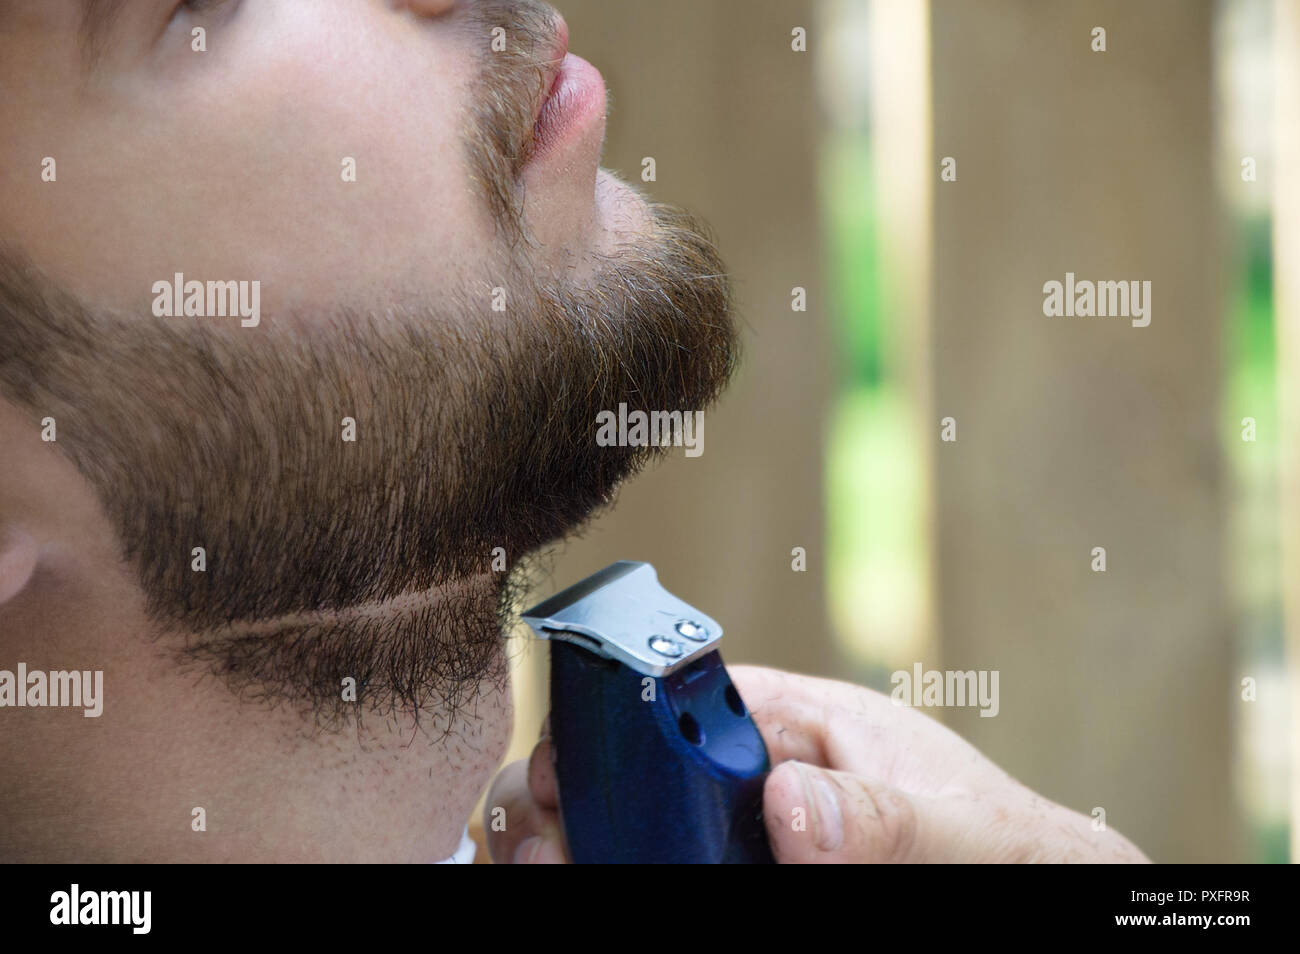 how to trim beard with beard trimmer